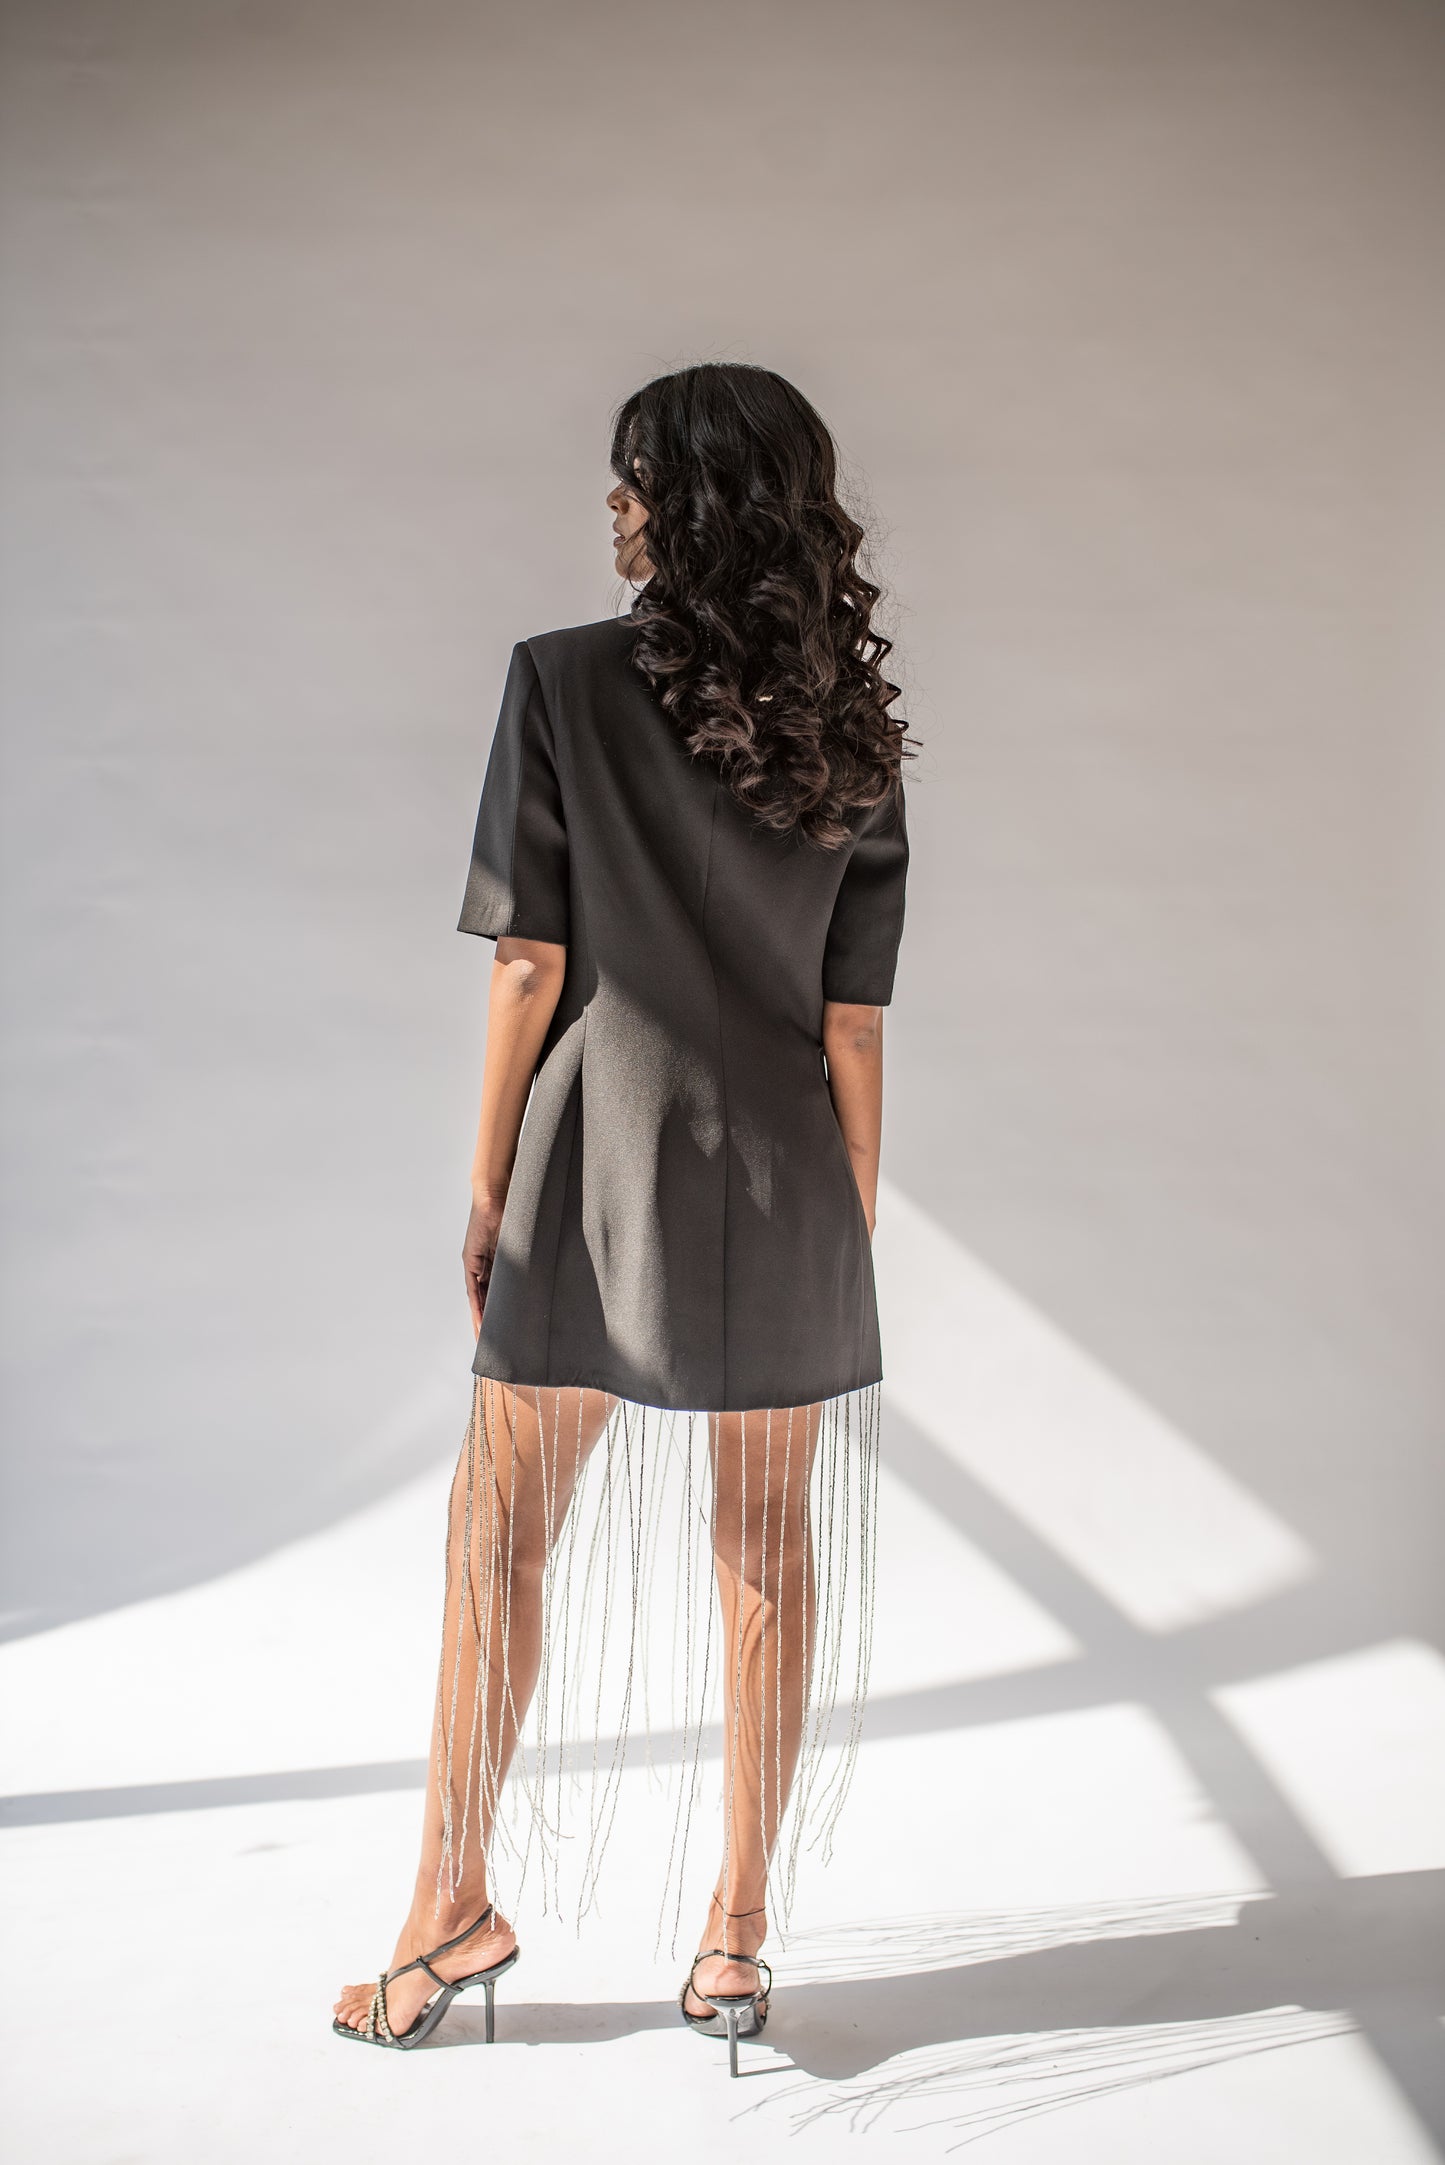 Half-sleeved blazer dress with long chain detailing